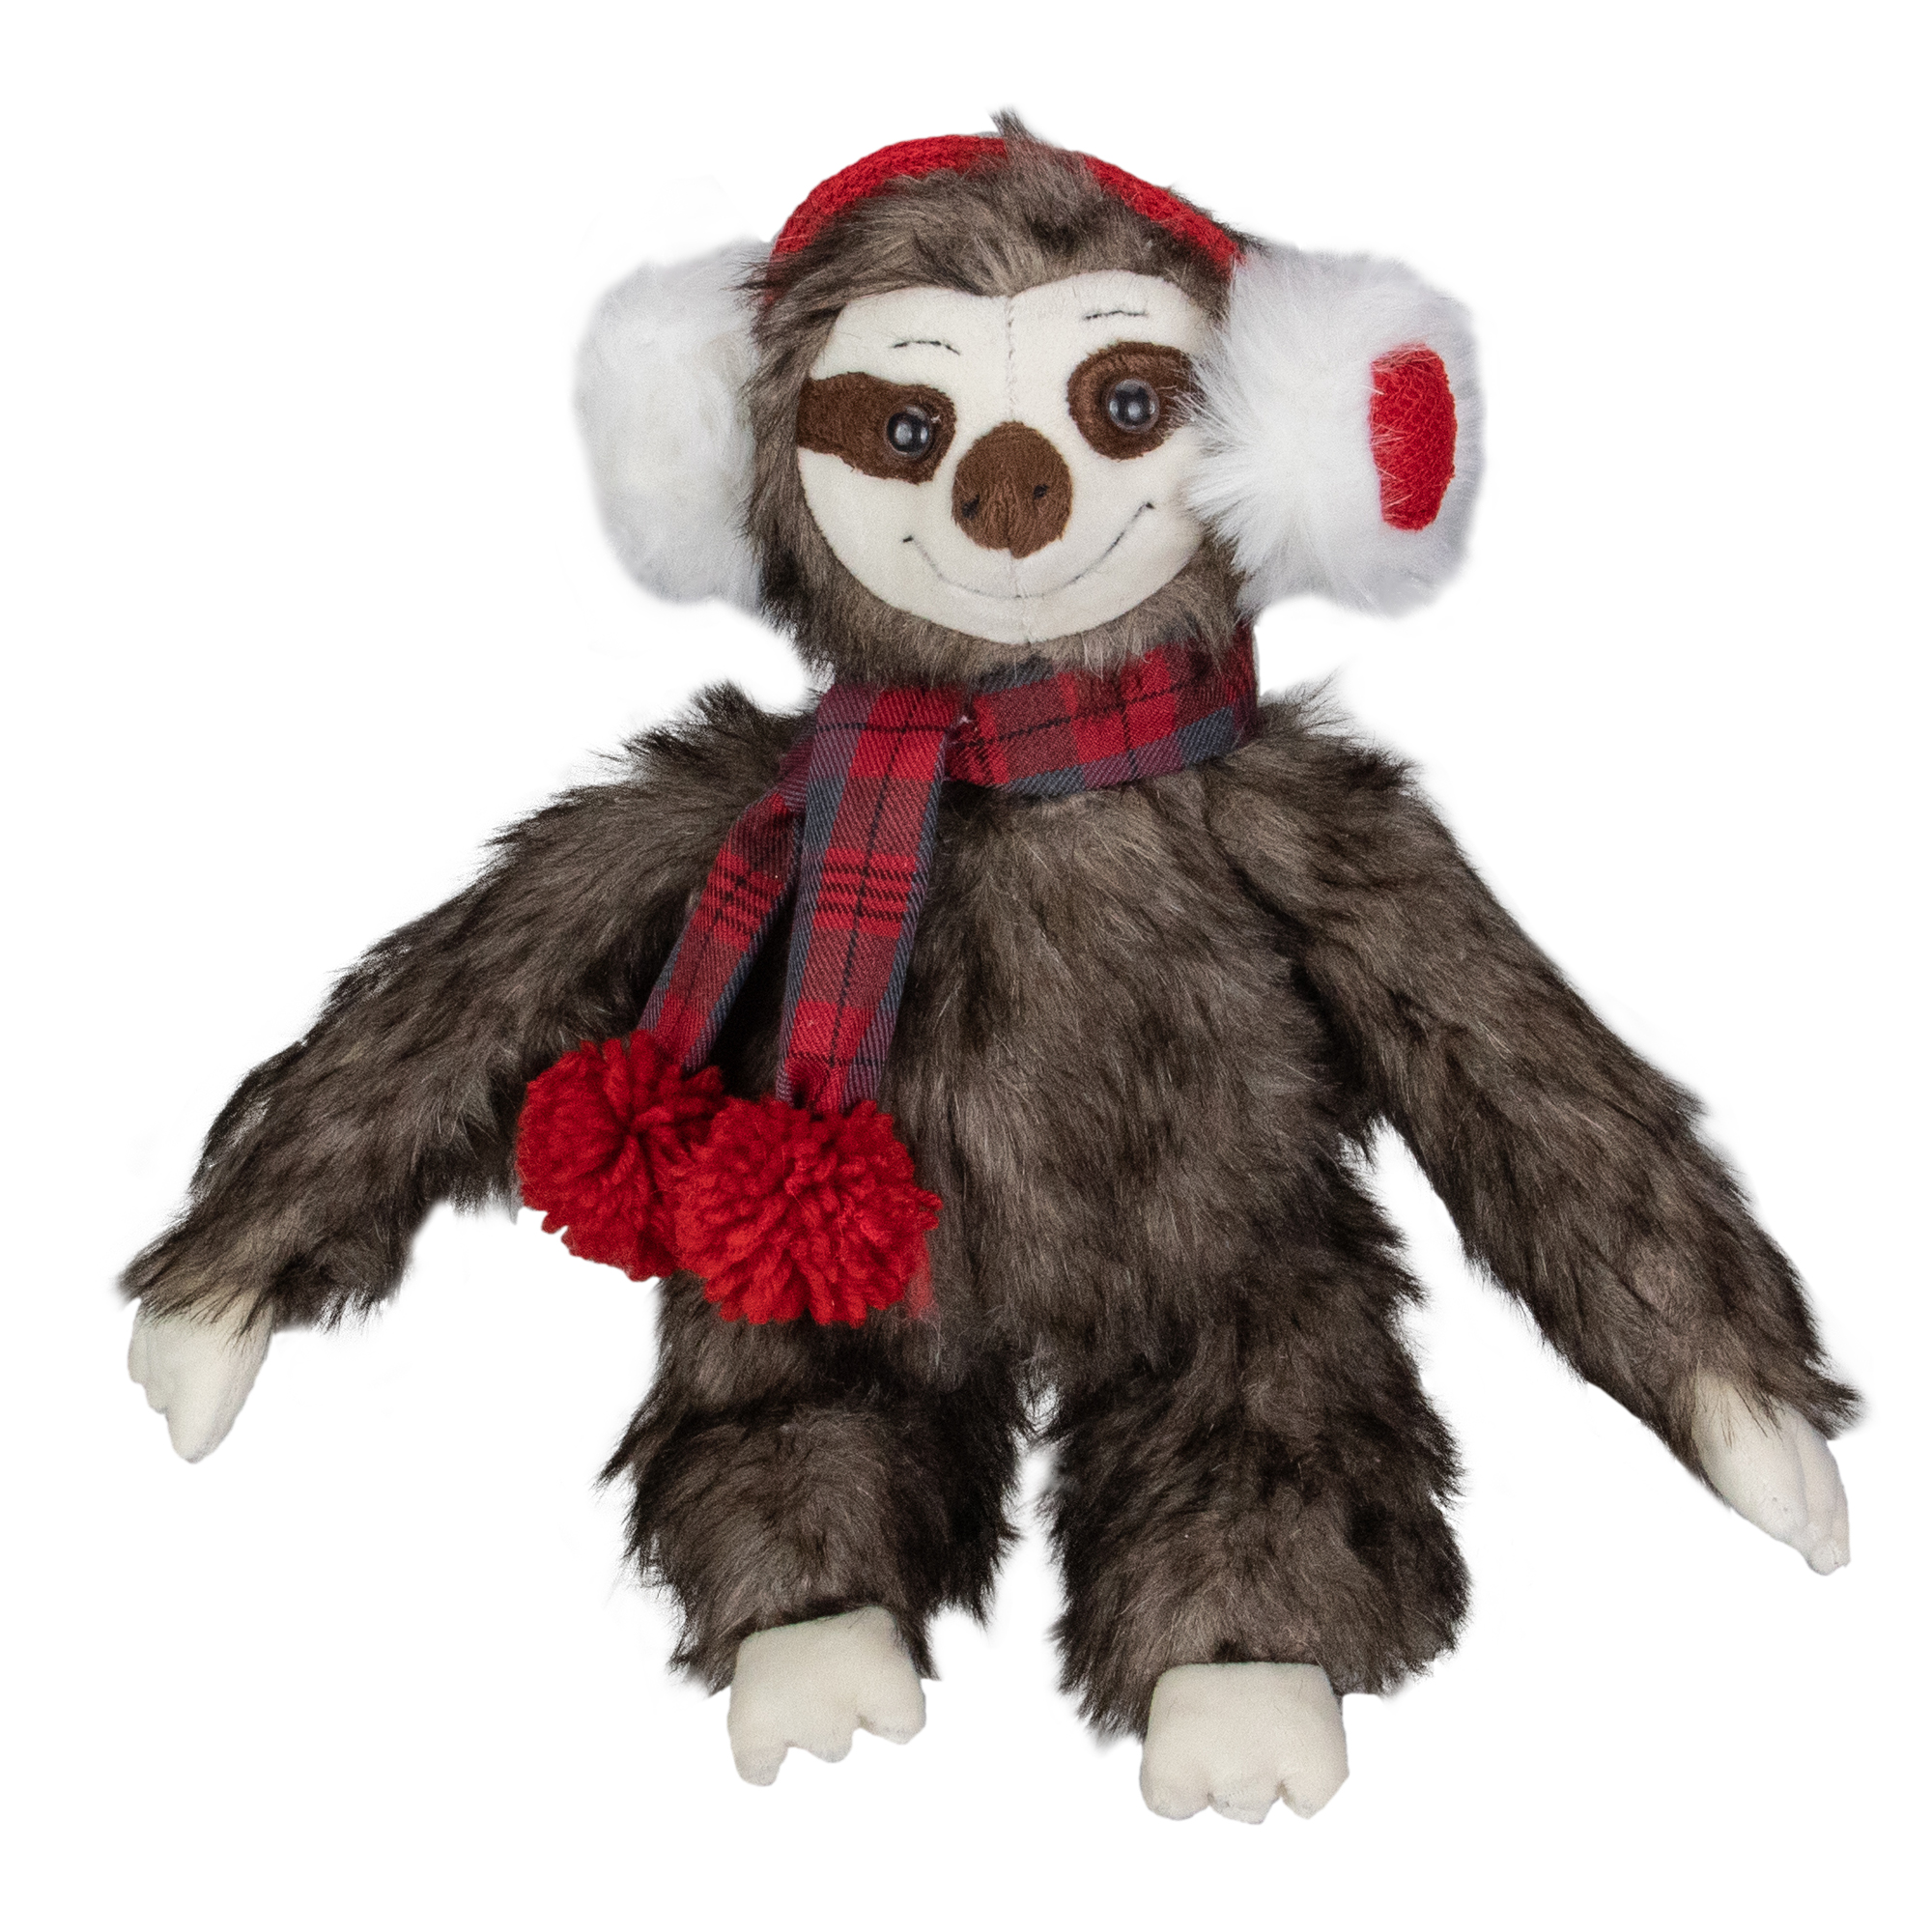 Northlight 34314240 12 in. Sitting Sloth Christmas Tabletop Decoration, Plush Brown